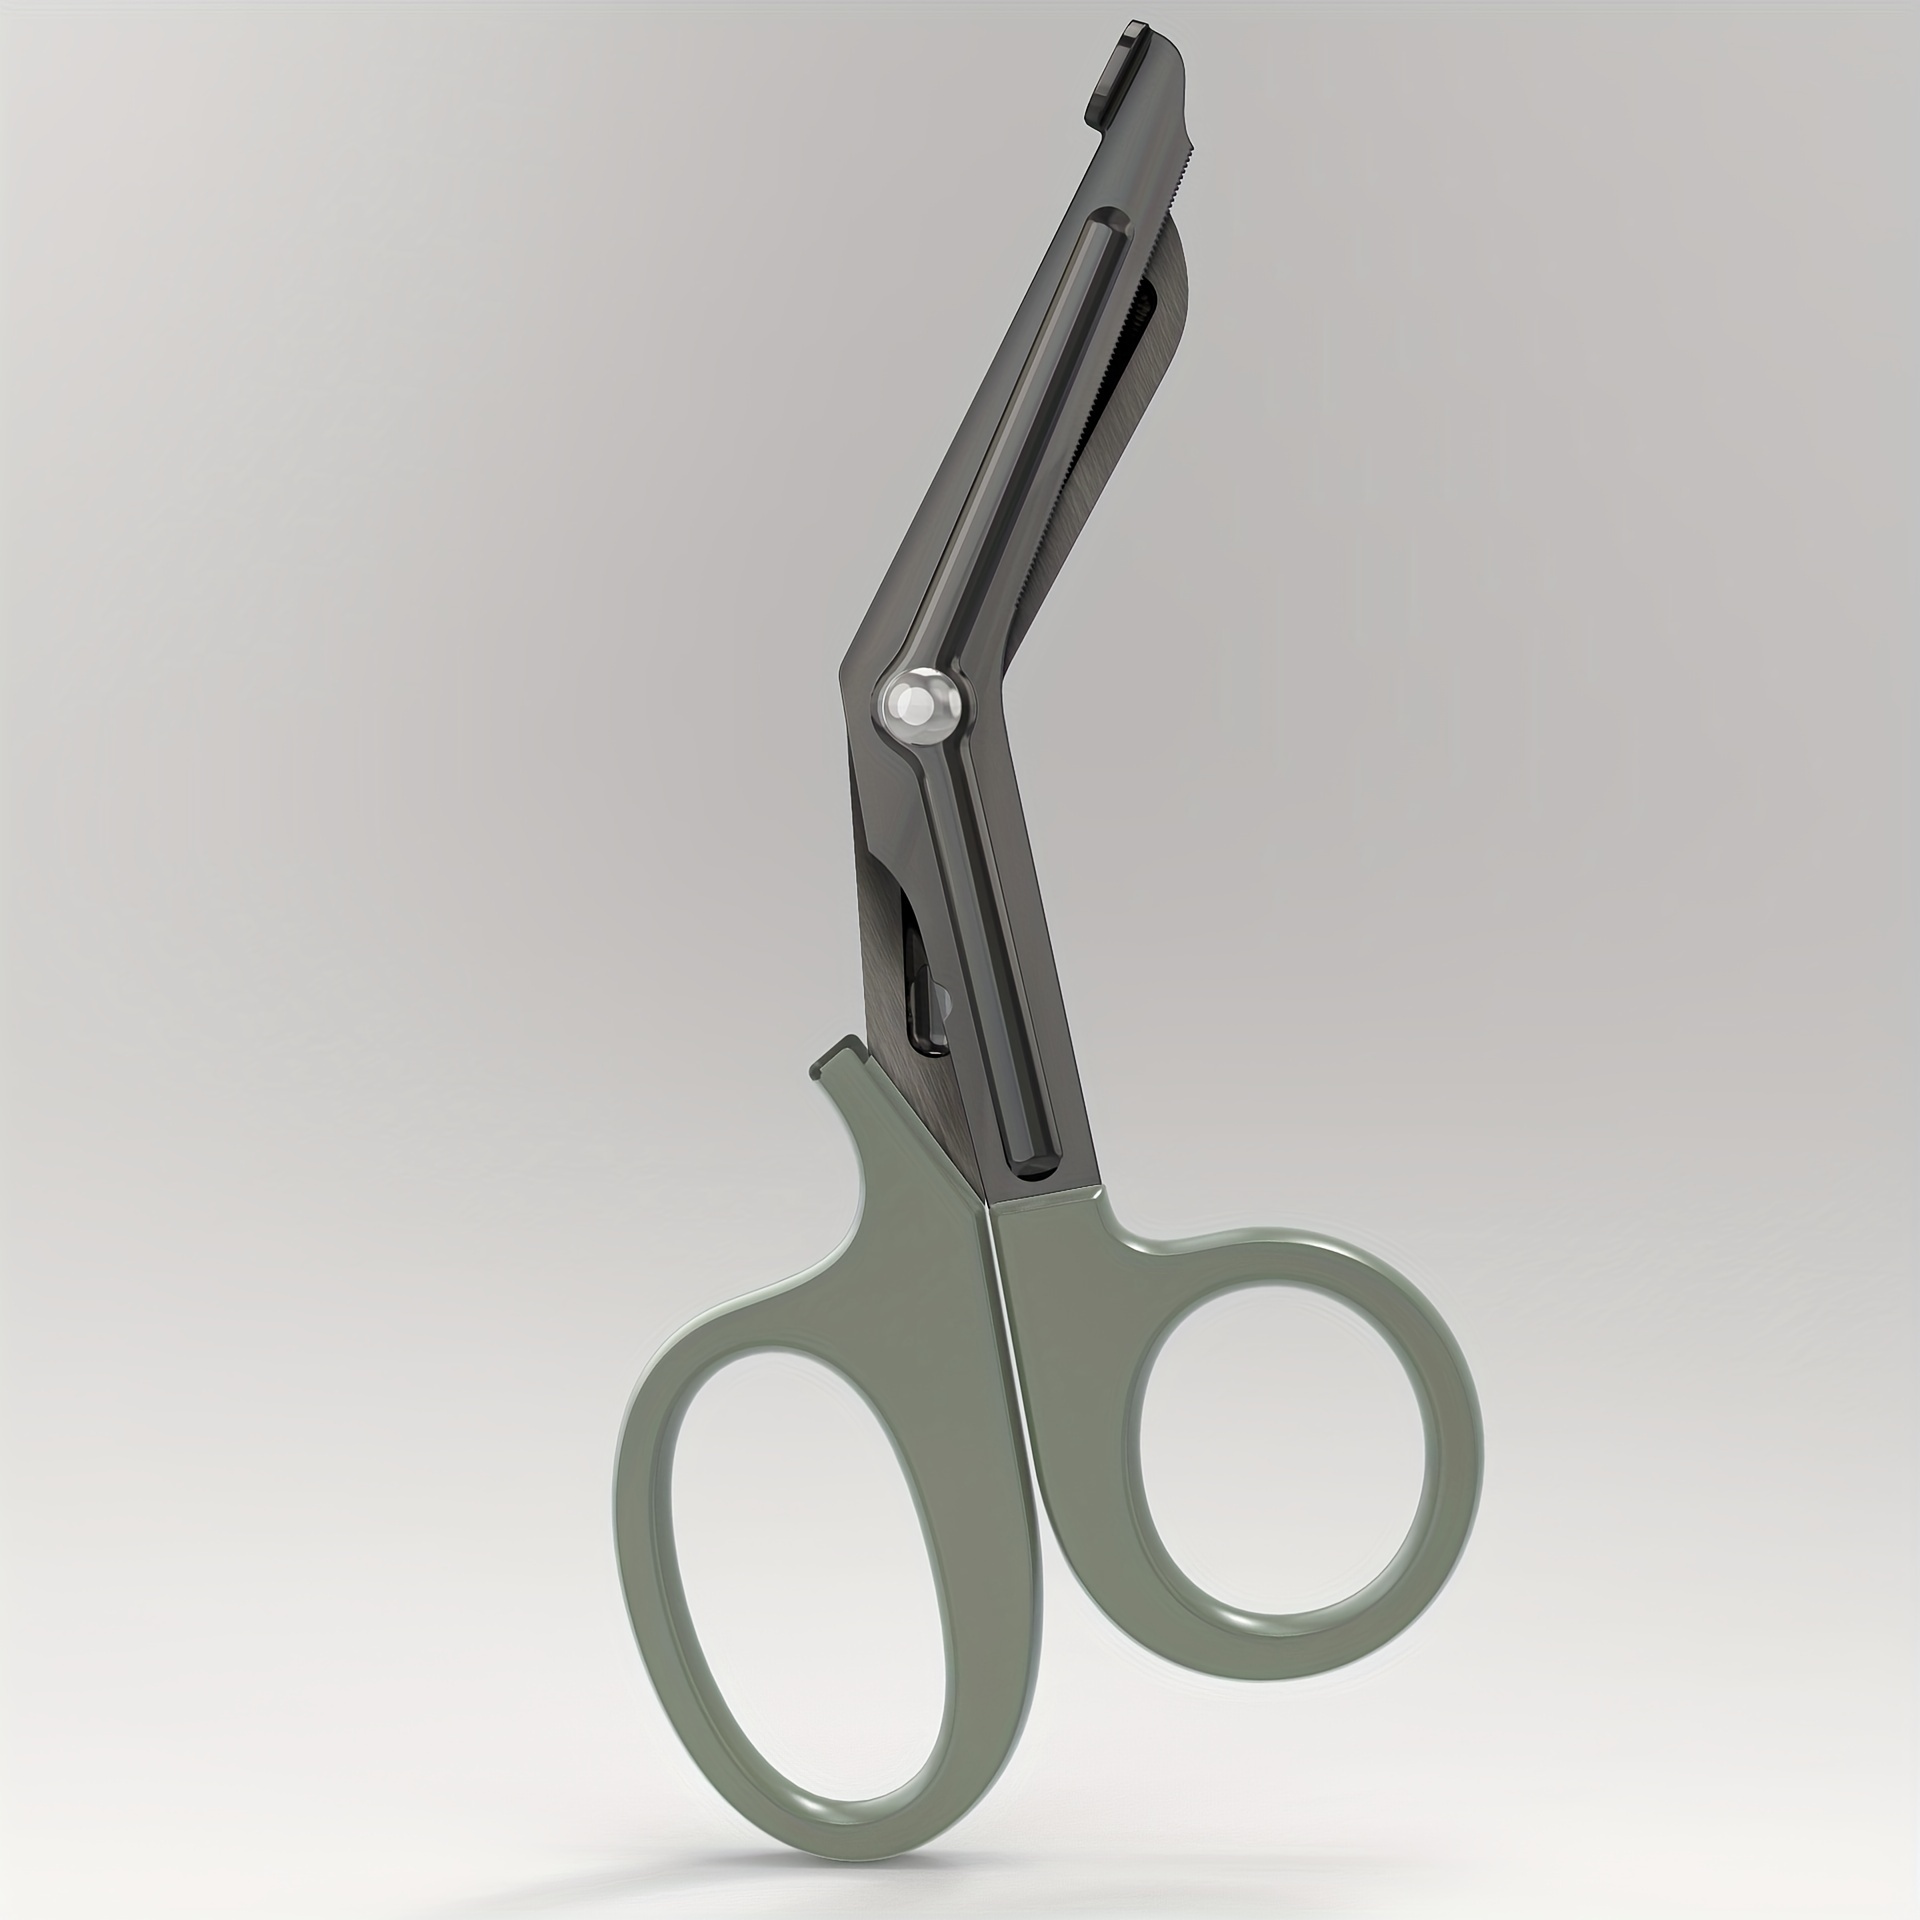 Bandage Scissors and Trauma Shears: What are They Used For